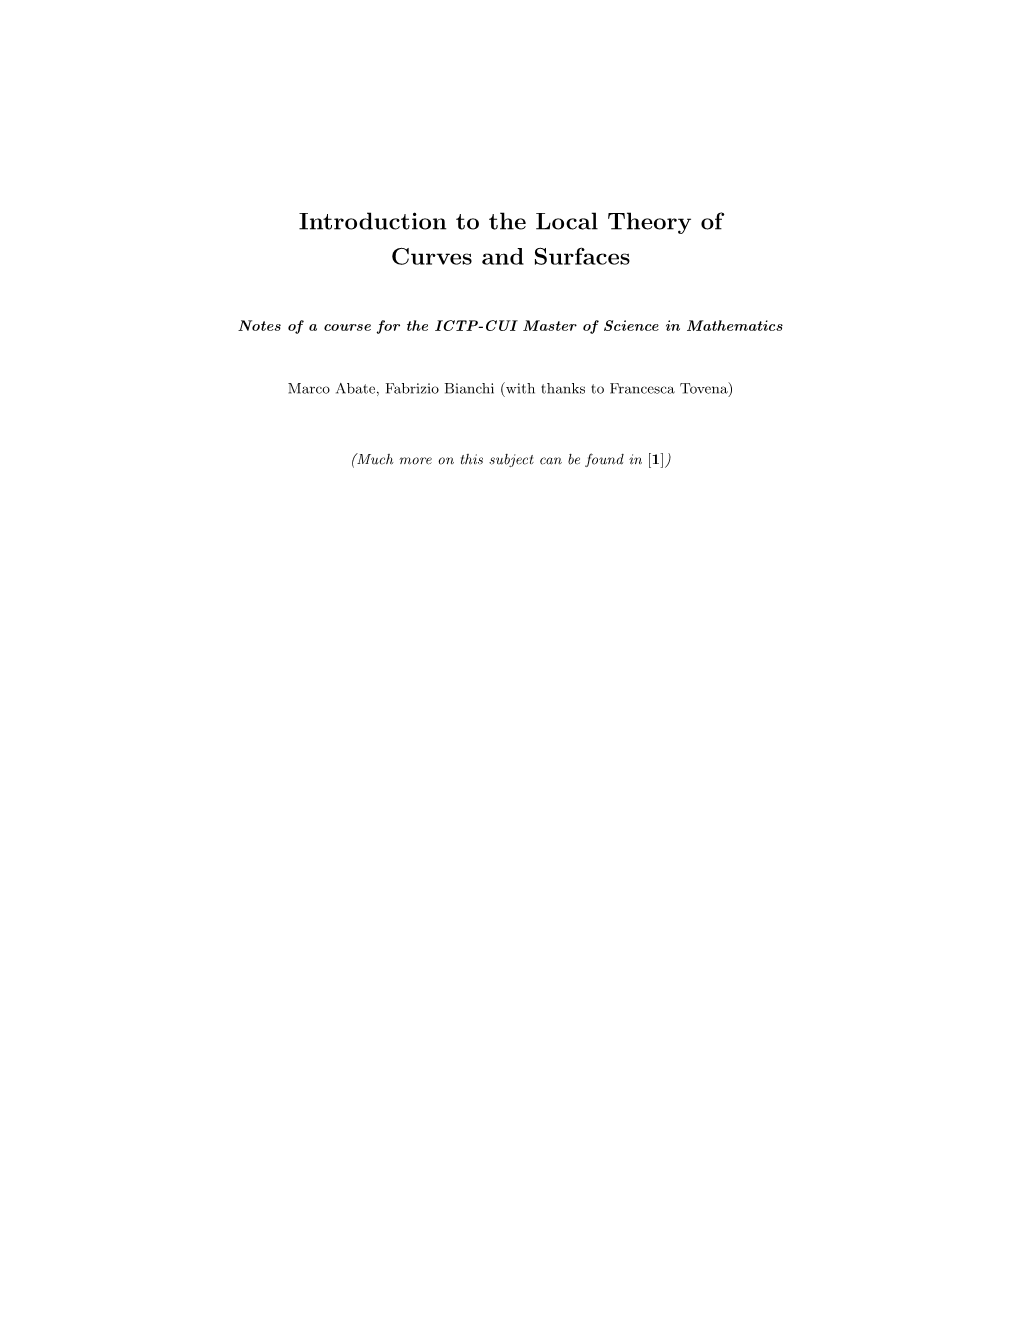 Introduction to the Local Theory of Curves and Surfaces